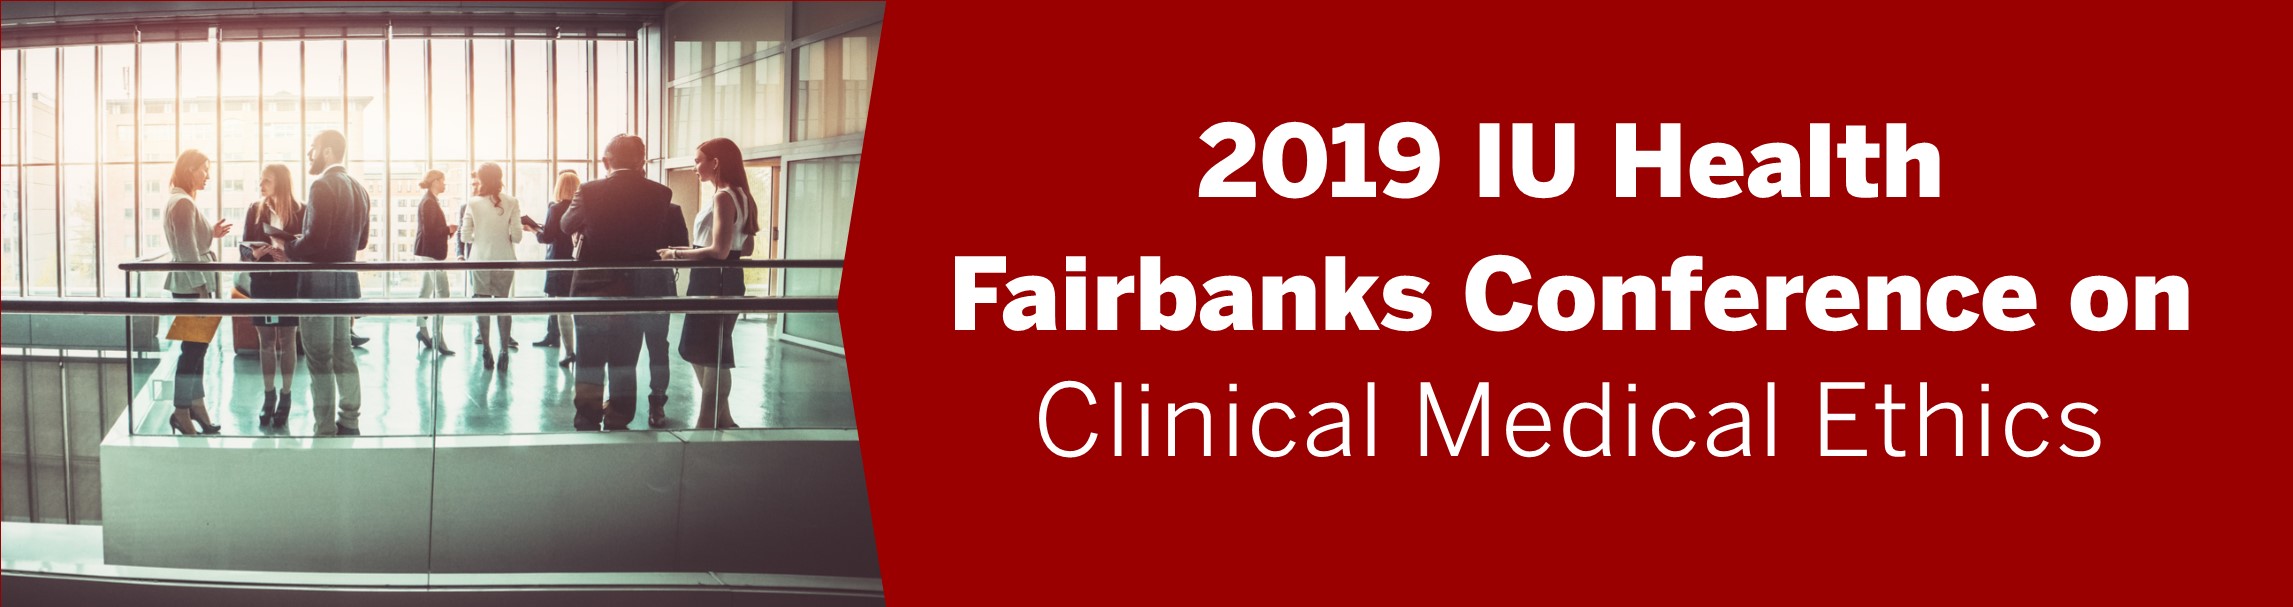 2019 IU Health Fairbanks Conference on Clinical Medical Ethics Banner